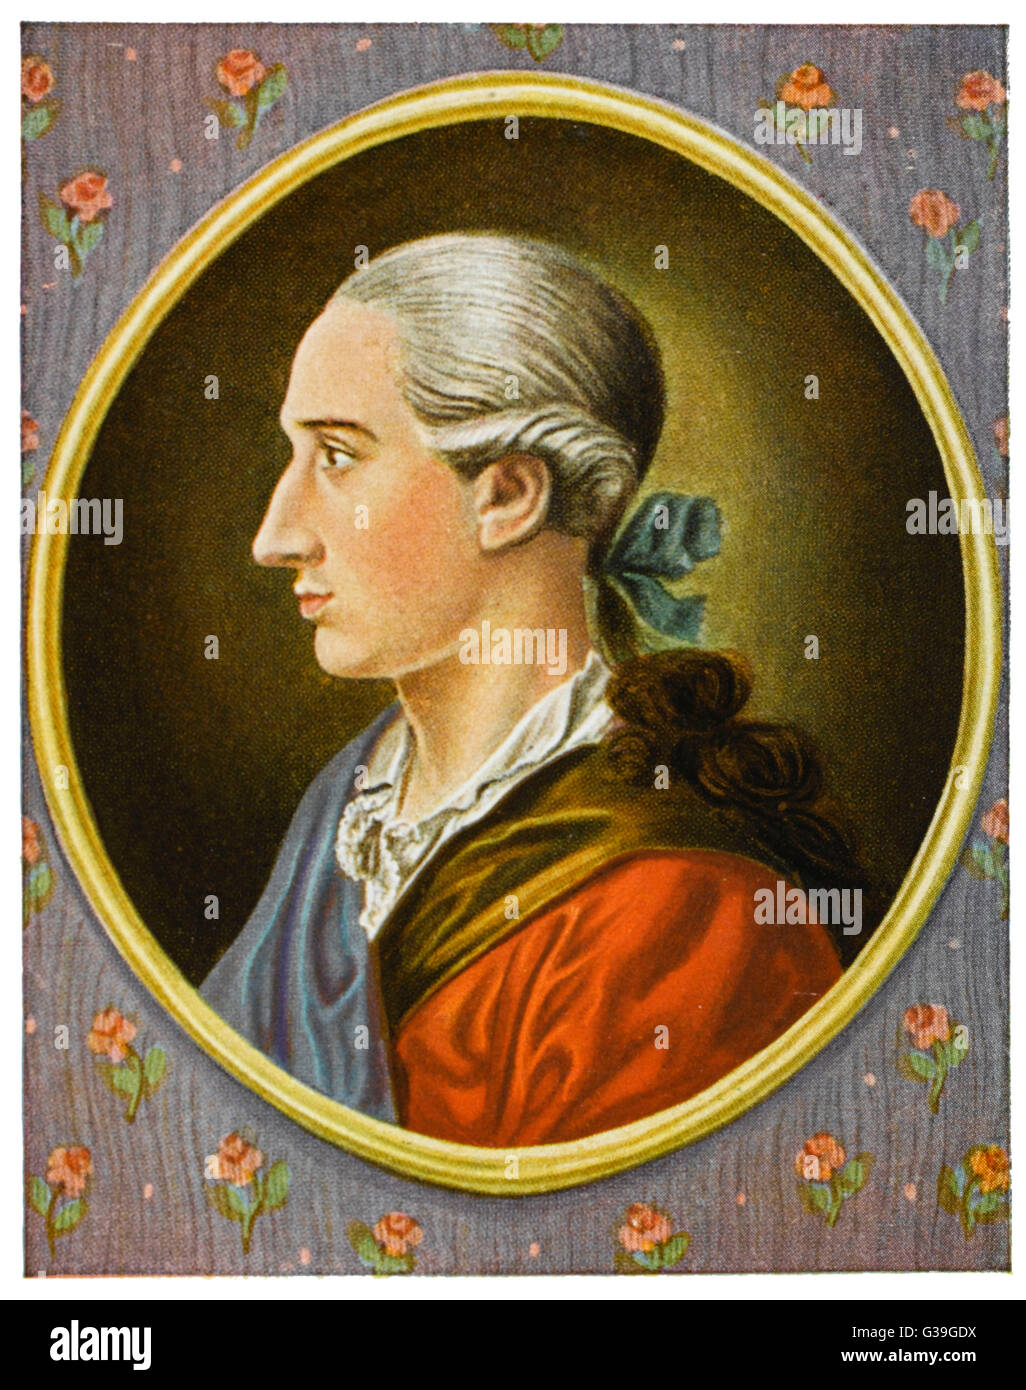 JOHANN WOLFGANG VON GOETHE  German writer and scientist,  as a young man       Date: 1749 - 1832 Stock Photo